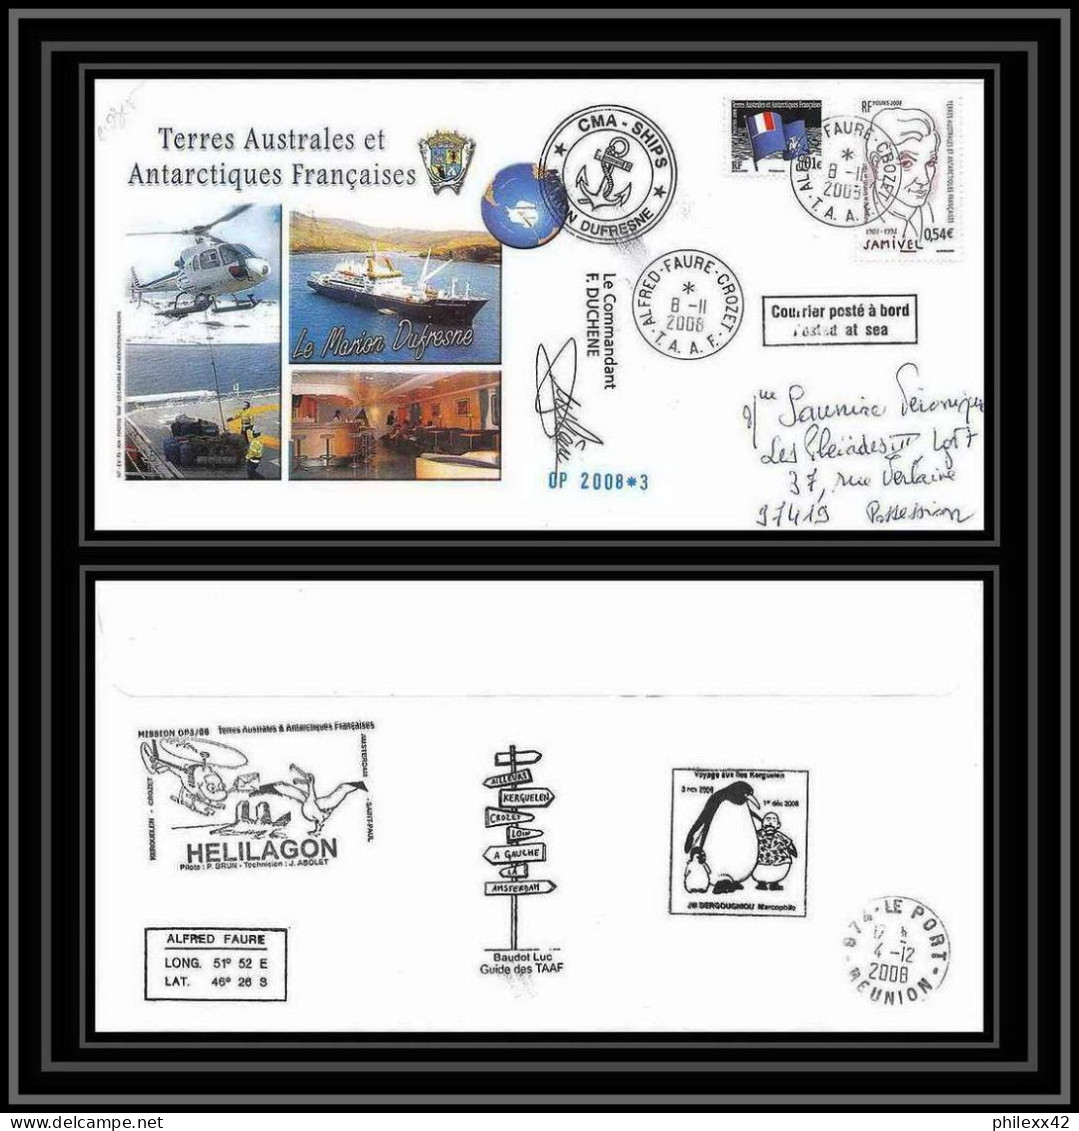 2843 ANTARCTIC Terres Australes TAAF Helilagon Lettre Cover Dufresne Signé Signed Op 2008/3 Crozet 8/11/2008 N°513 - Helicopters